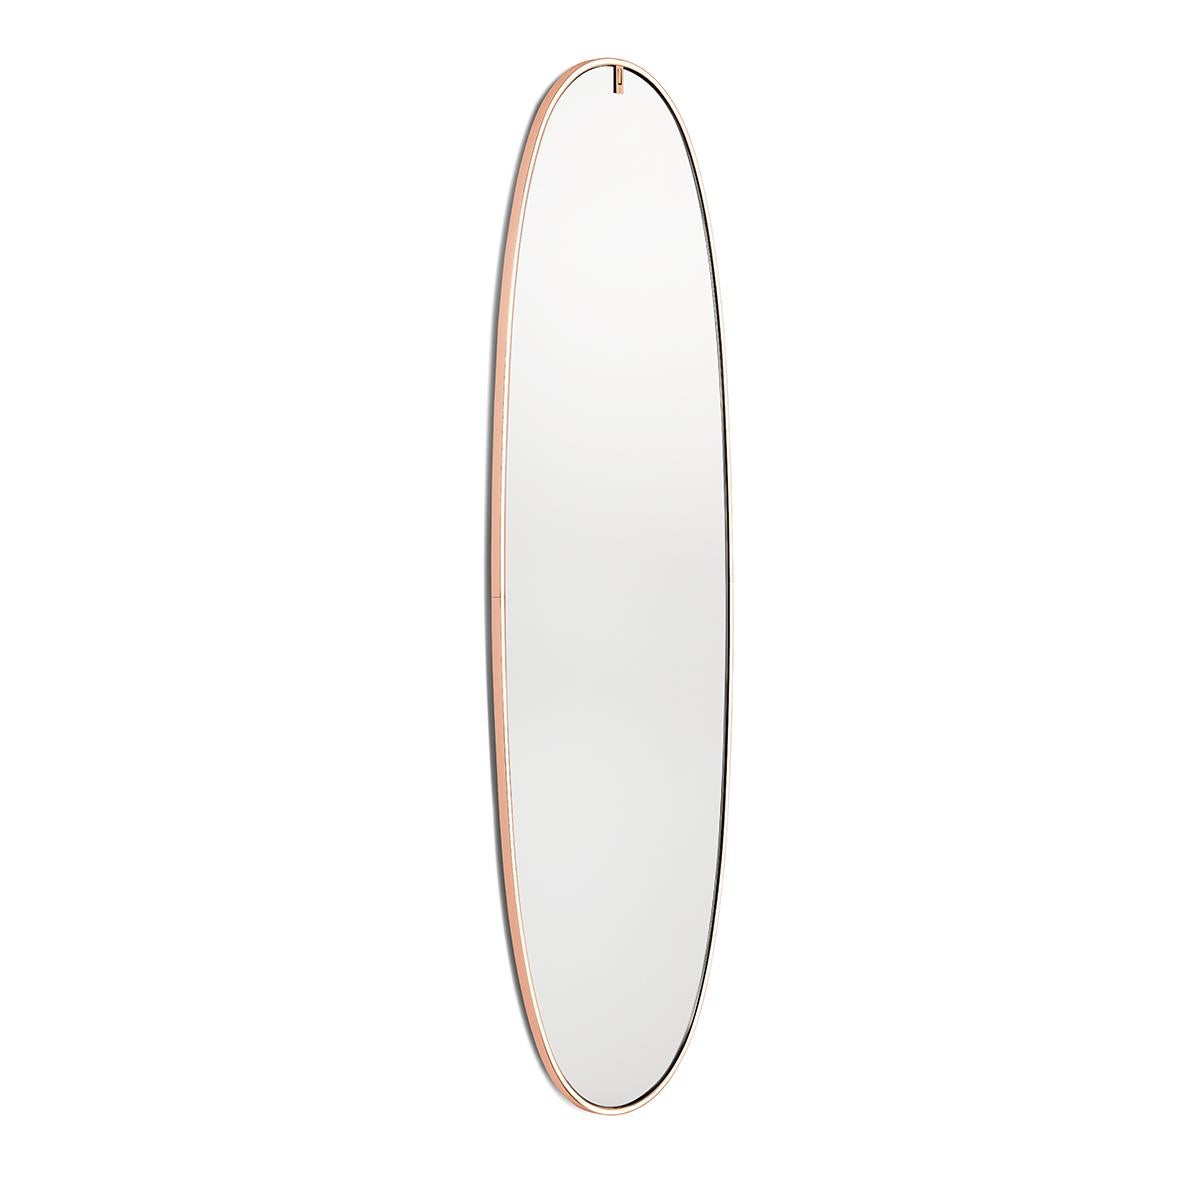 La Plus Belle is a mirror with incorporated light sources. The aluminium frame is available in various finishes (polished gold, polished copper, polished bronze and aluminum, and houses high chromatic rendering led light sources (CRI 95) and an